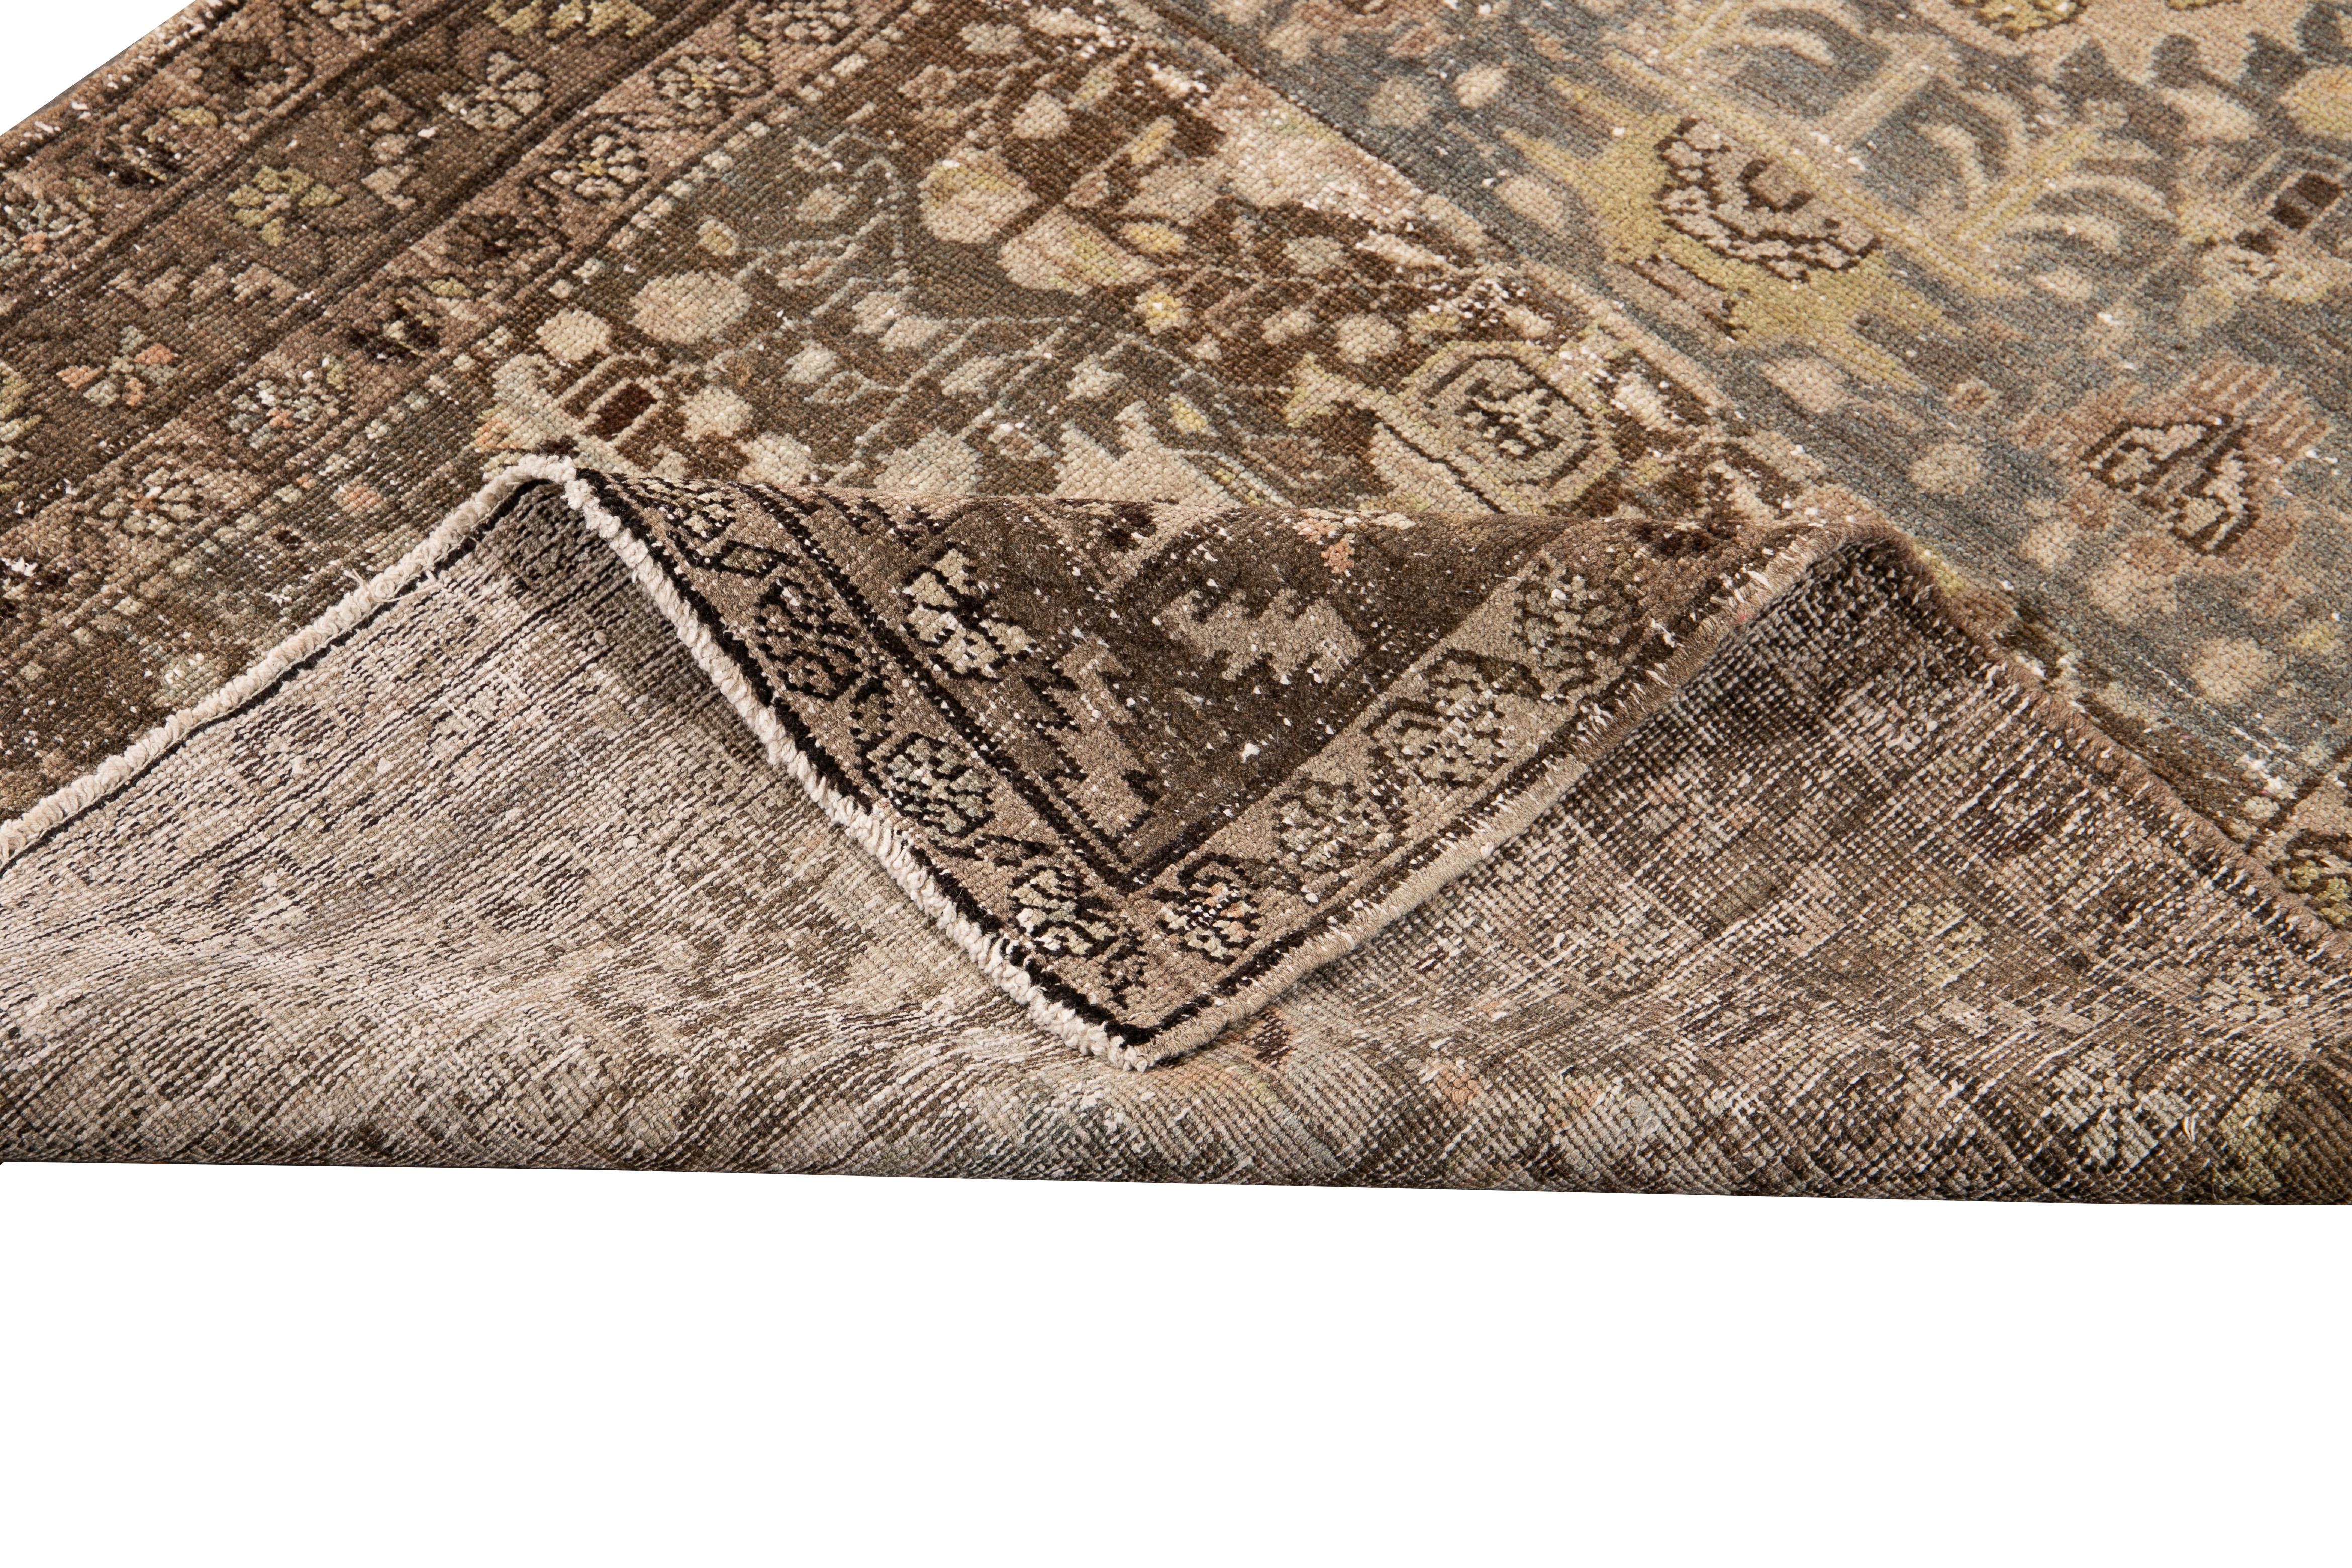 Beautiful antique Persian Malayer gray Runner rug with a brown border and gray field with a traditional all-over floral design, circa 1910.

This rug measures: 3'5